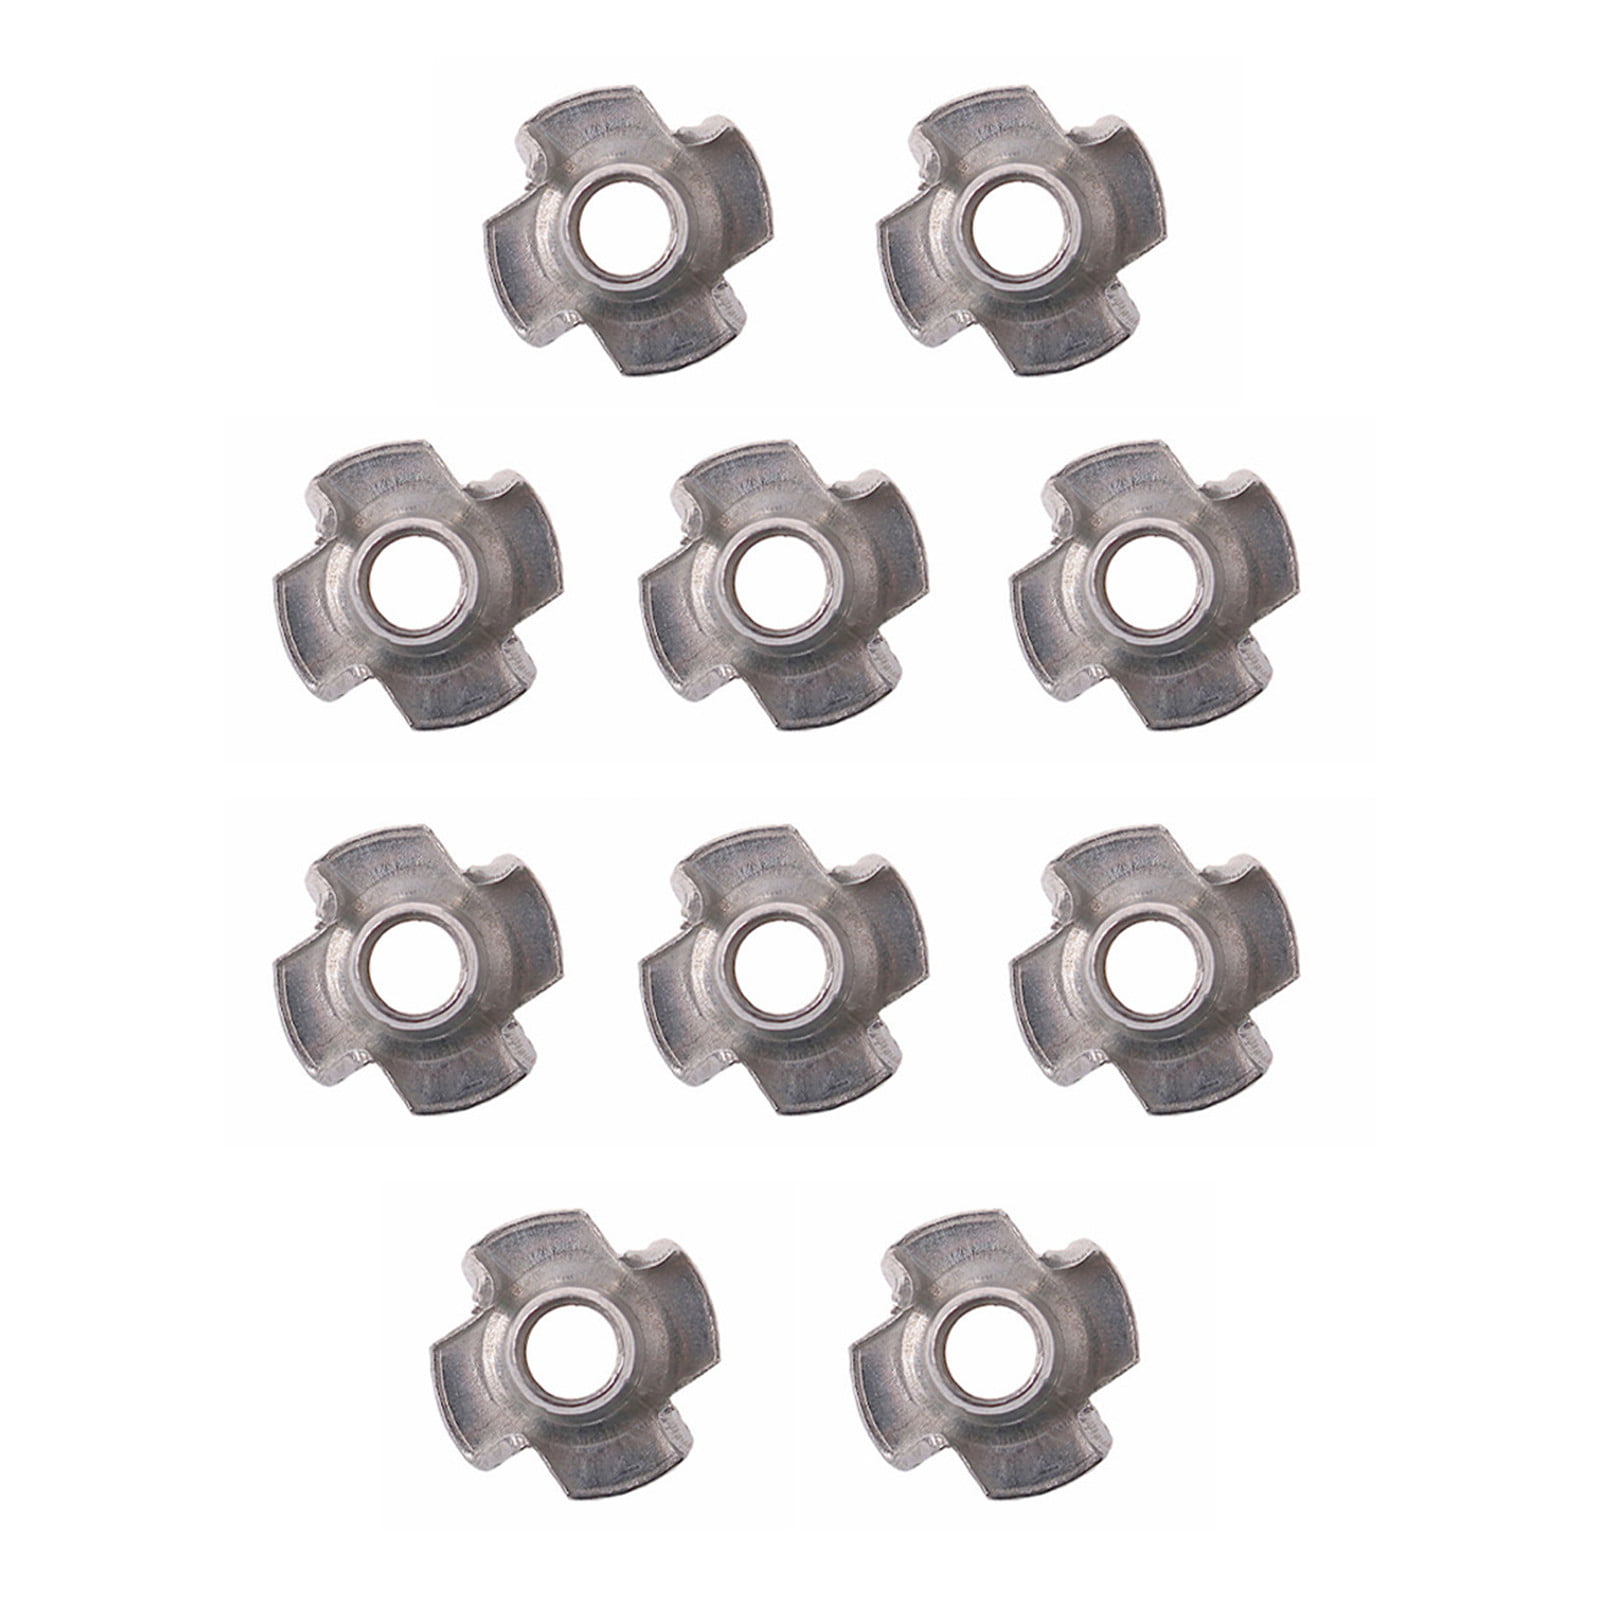 10-100PCS Four 4 Prong T Nut Zinc Plated Tee Nuts 1/4-20 Pitch M3-4-5-6-8-10 